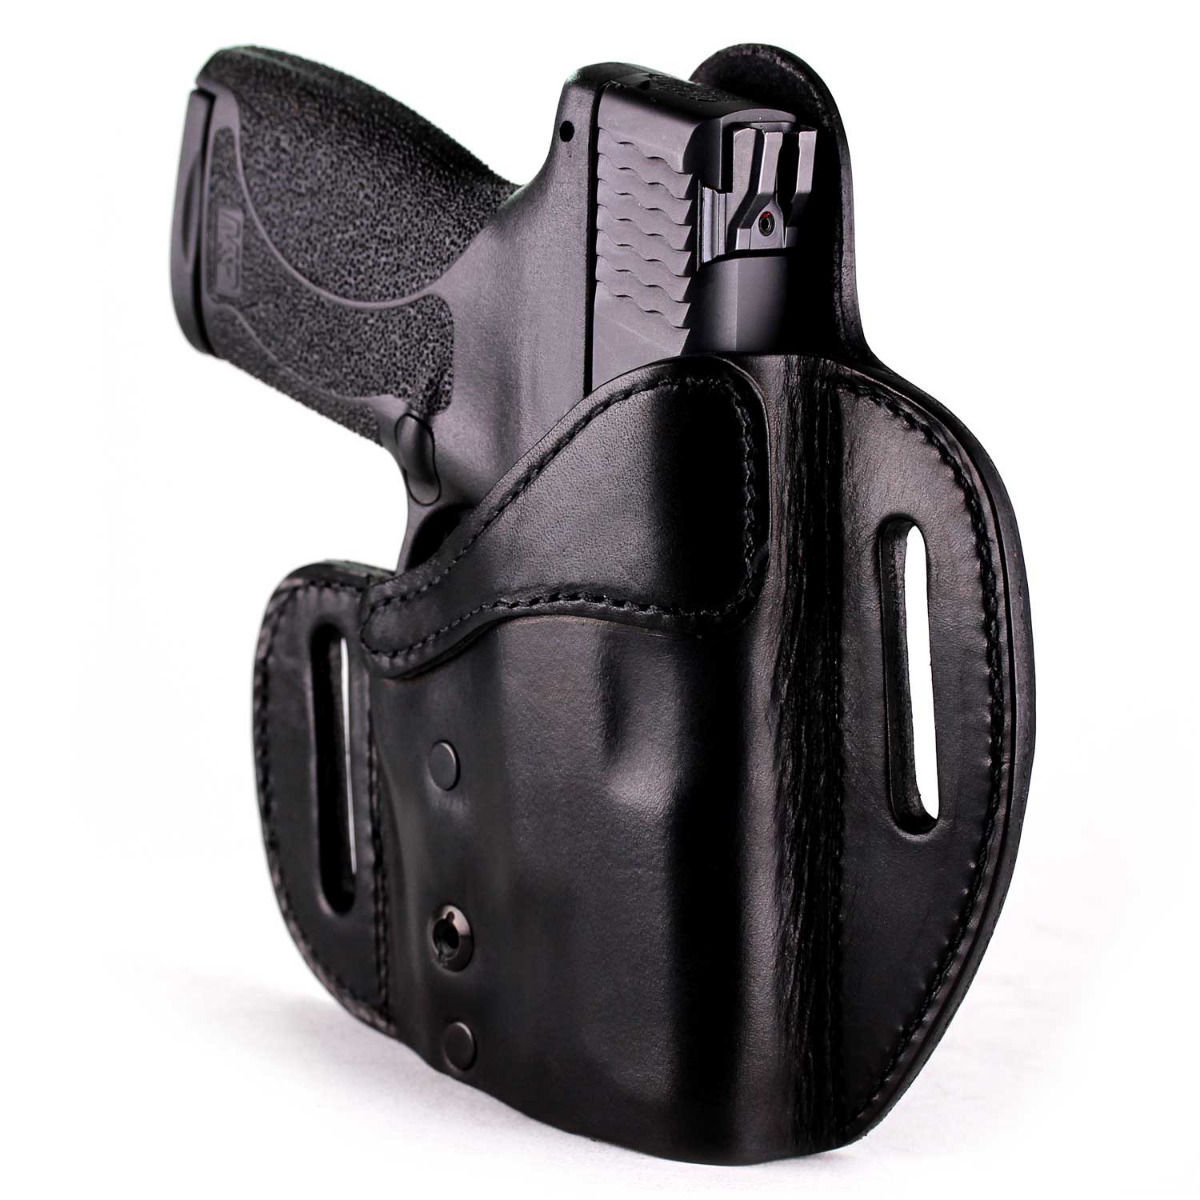 Details about   Leather IWB Inside the Waistband Holster for Glock 19 Made in USA Black or Brown 